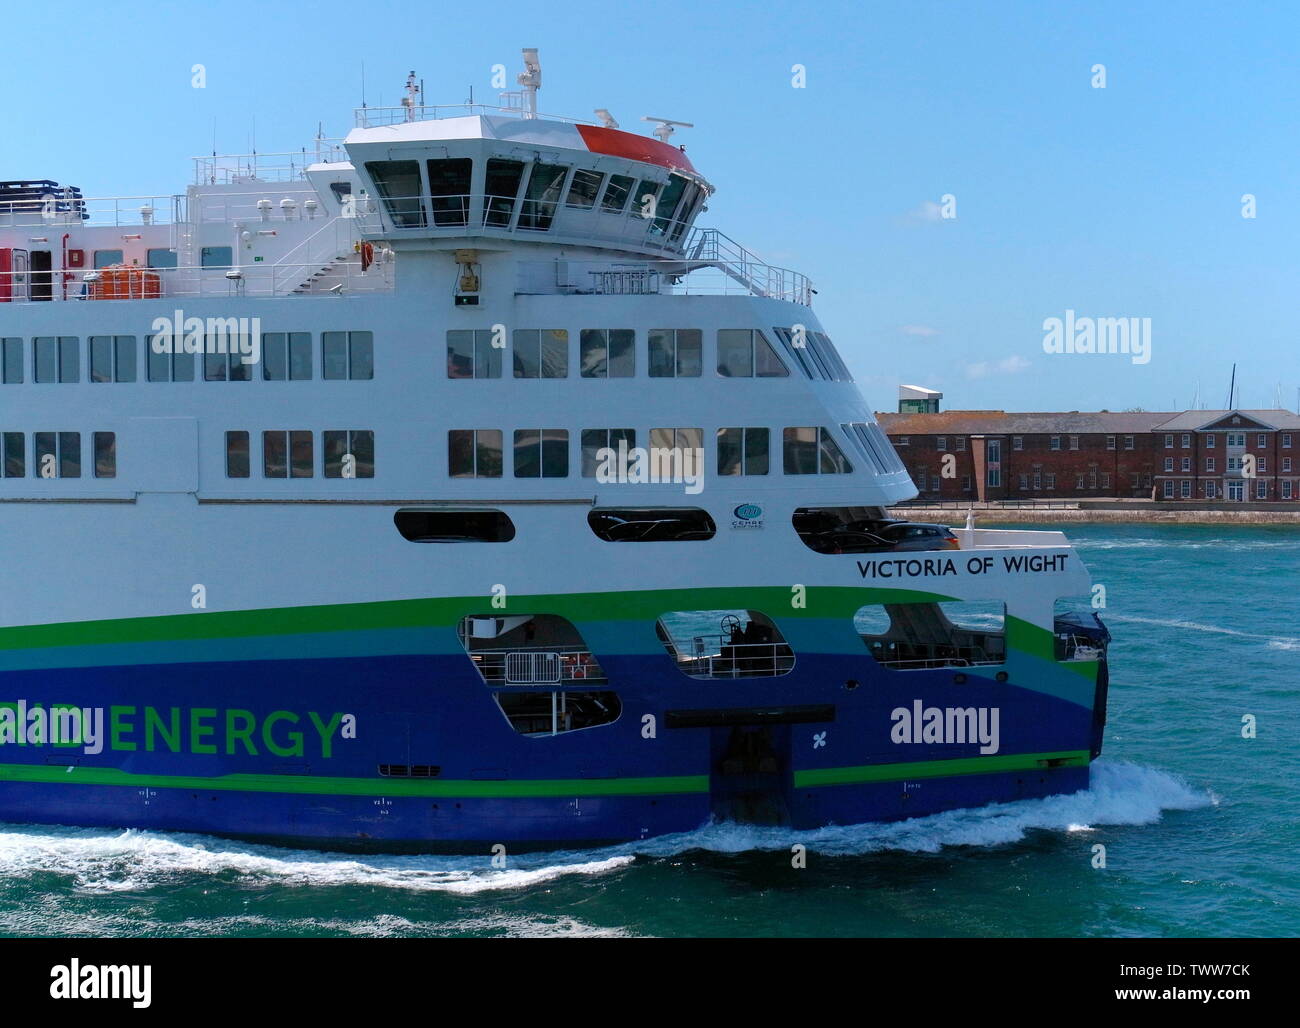 AJAXNETPHOTO. 3RD JUNE, 2019.  PORTSMOUTH, ENGLAND - PORTSMOUTH TO ISLE OF WIGHT WIGHT LINK VICTORIA OF WIGHT HYBRID ENERGY FERRY INBOUND TO THE CAMBER, OLD PORTSMOUTH. PHOTO:JONATHAN EASTLAND/AJAX REF:GXR190306 7880 Stock Photo